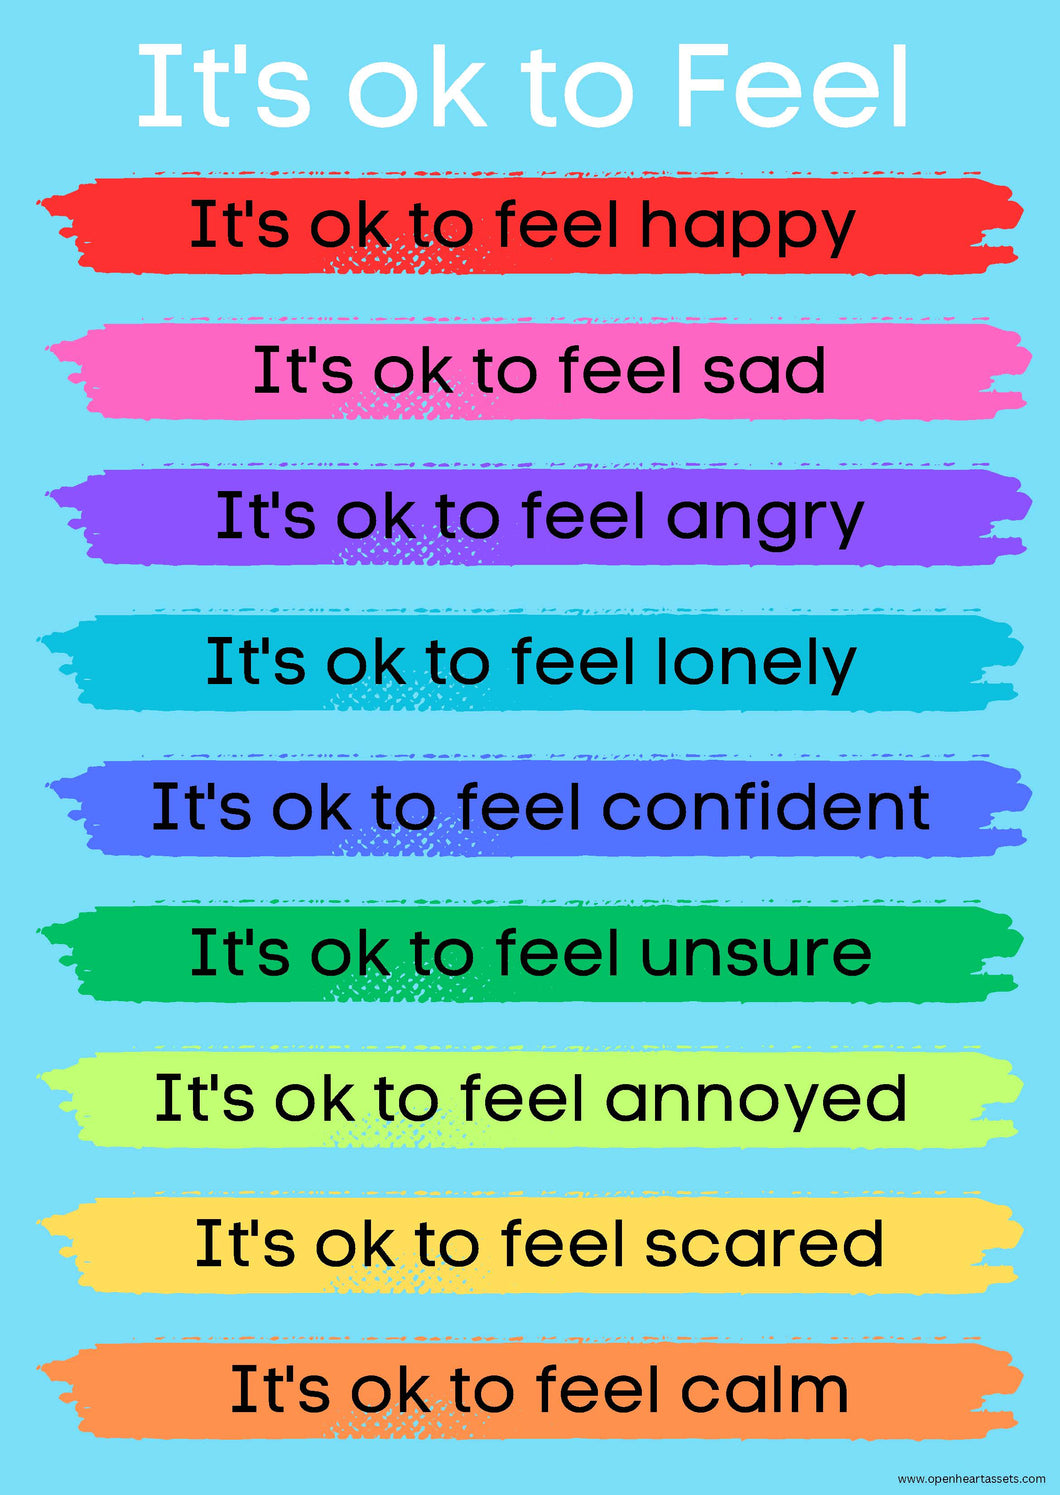 Large Mental Health Poster - It's Ok to Feel